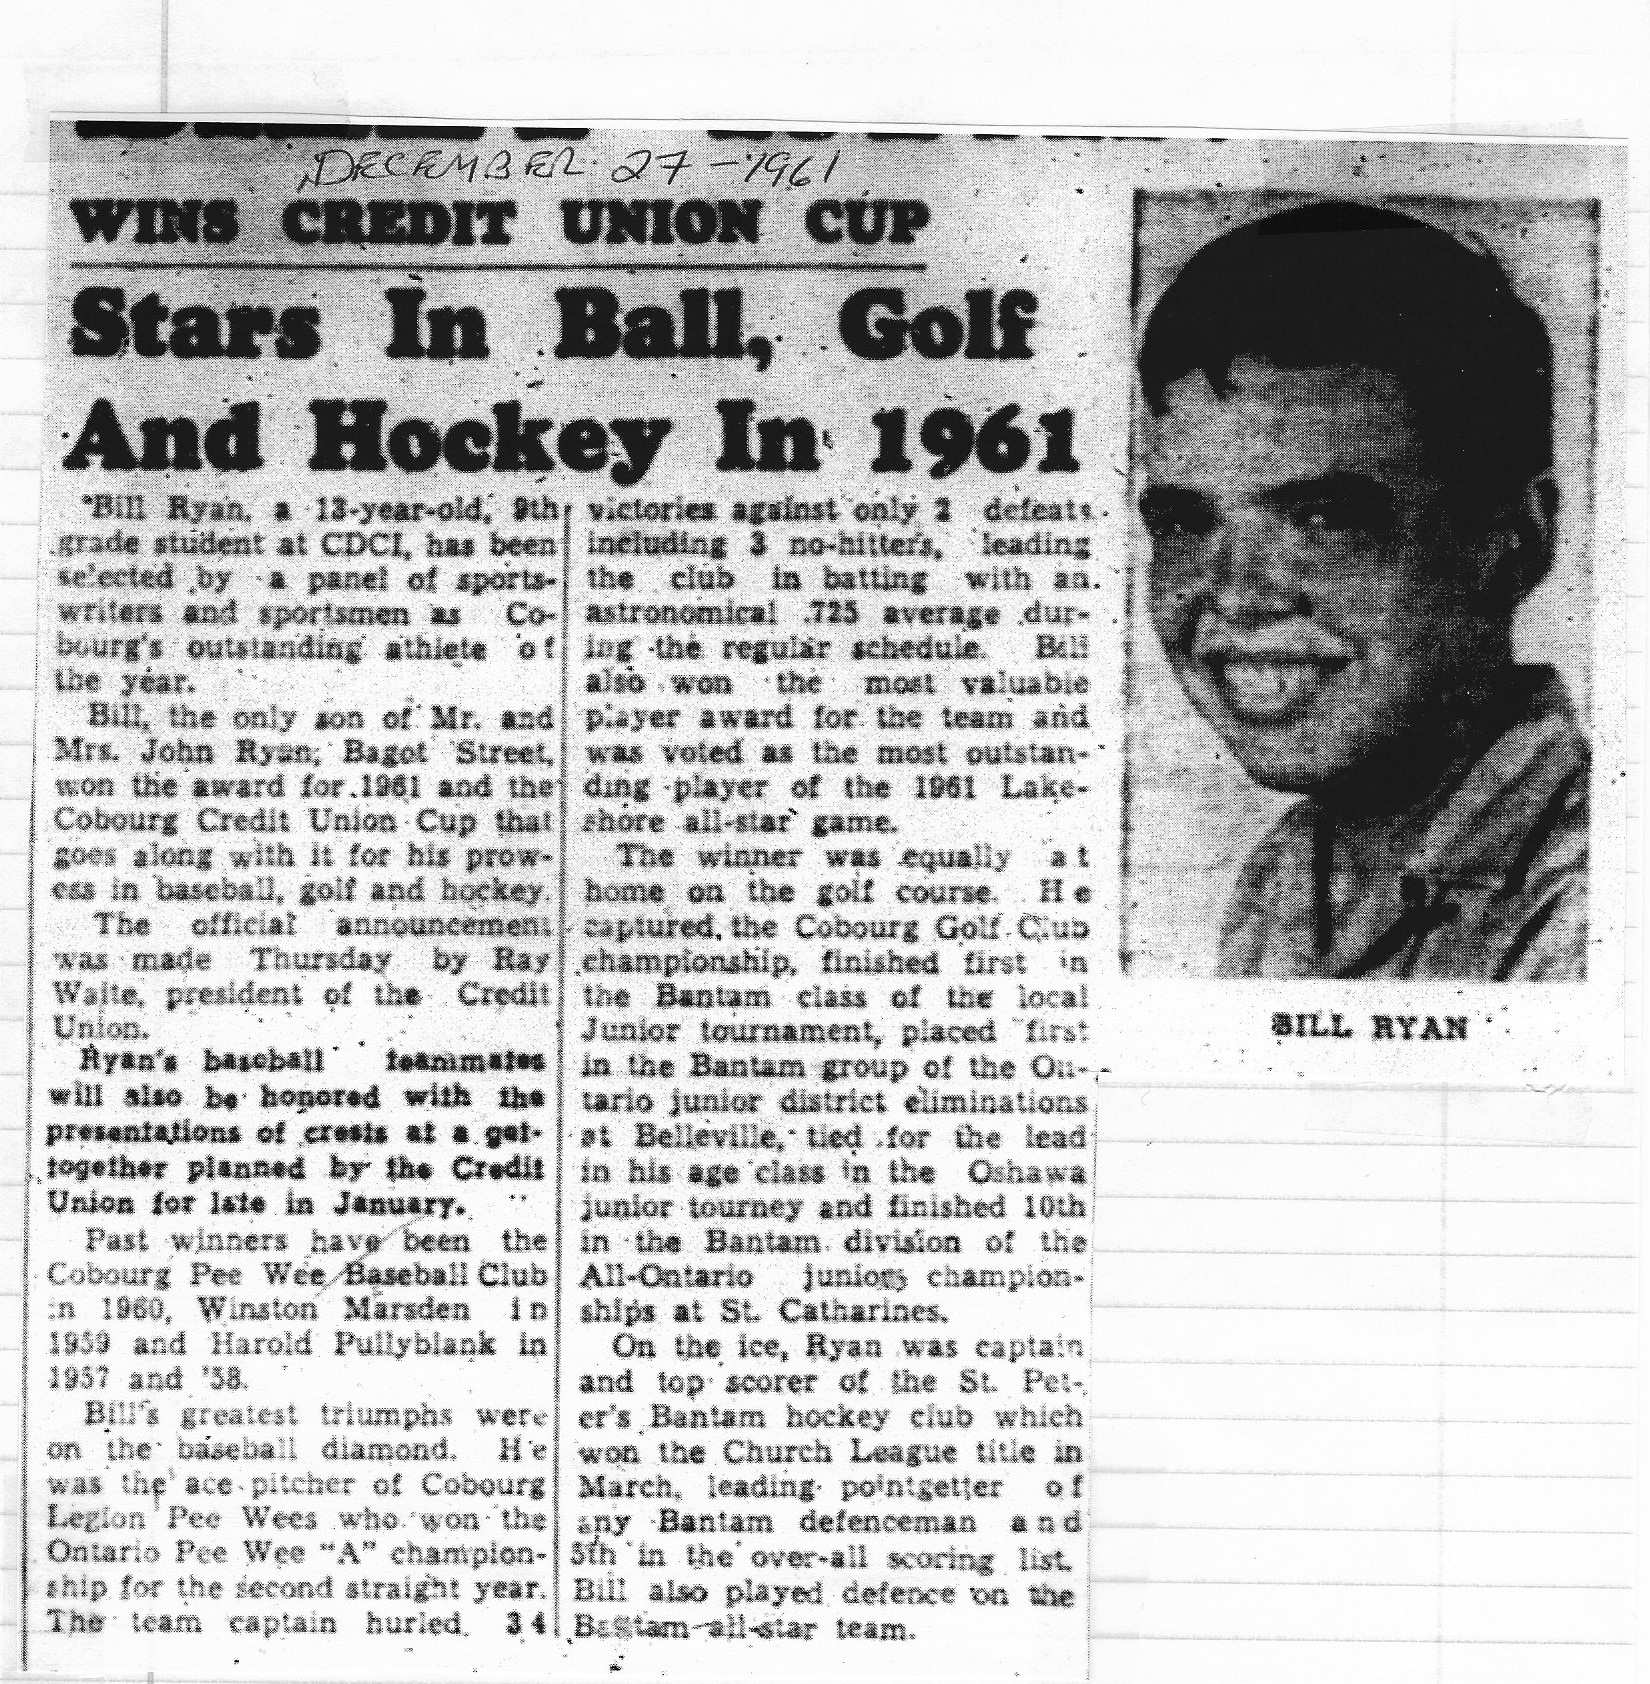 1961-12-27 Golf -Bill Ryan Outstanding Athlete of the Year